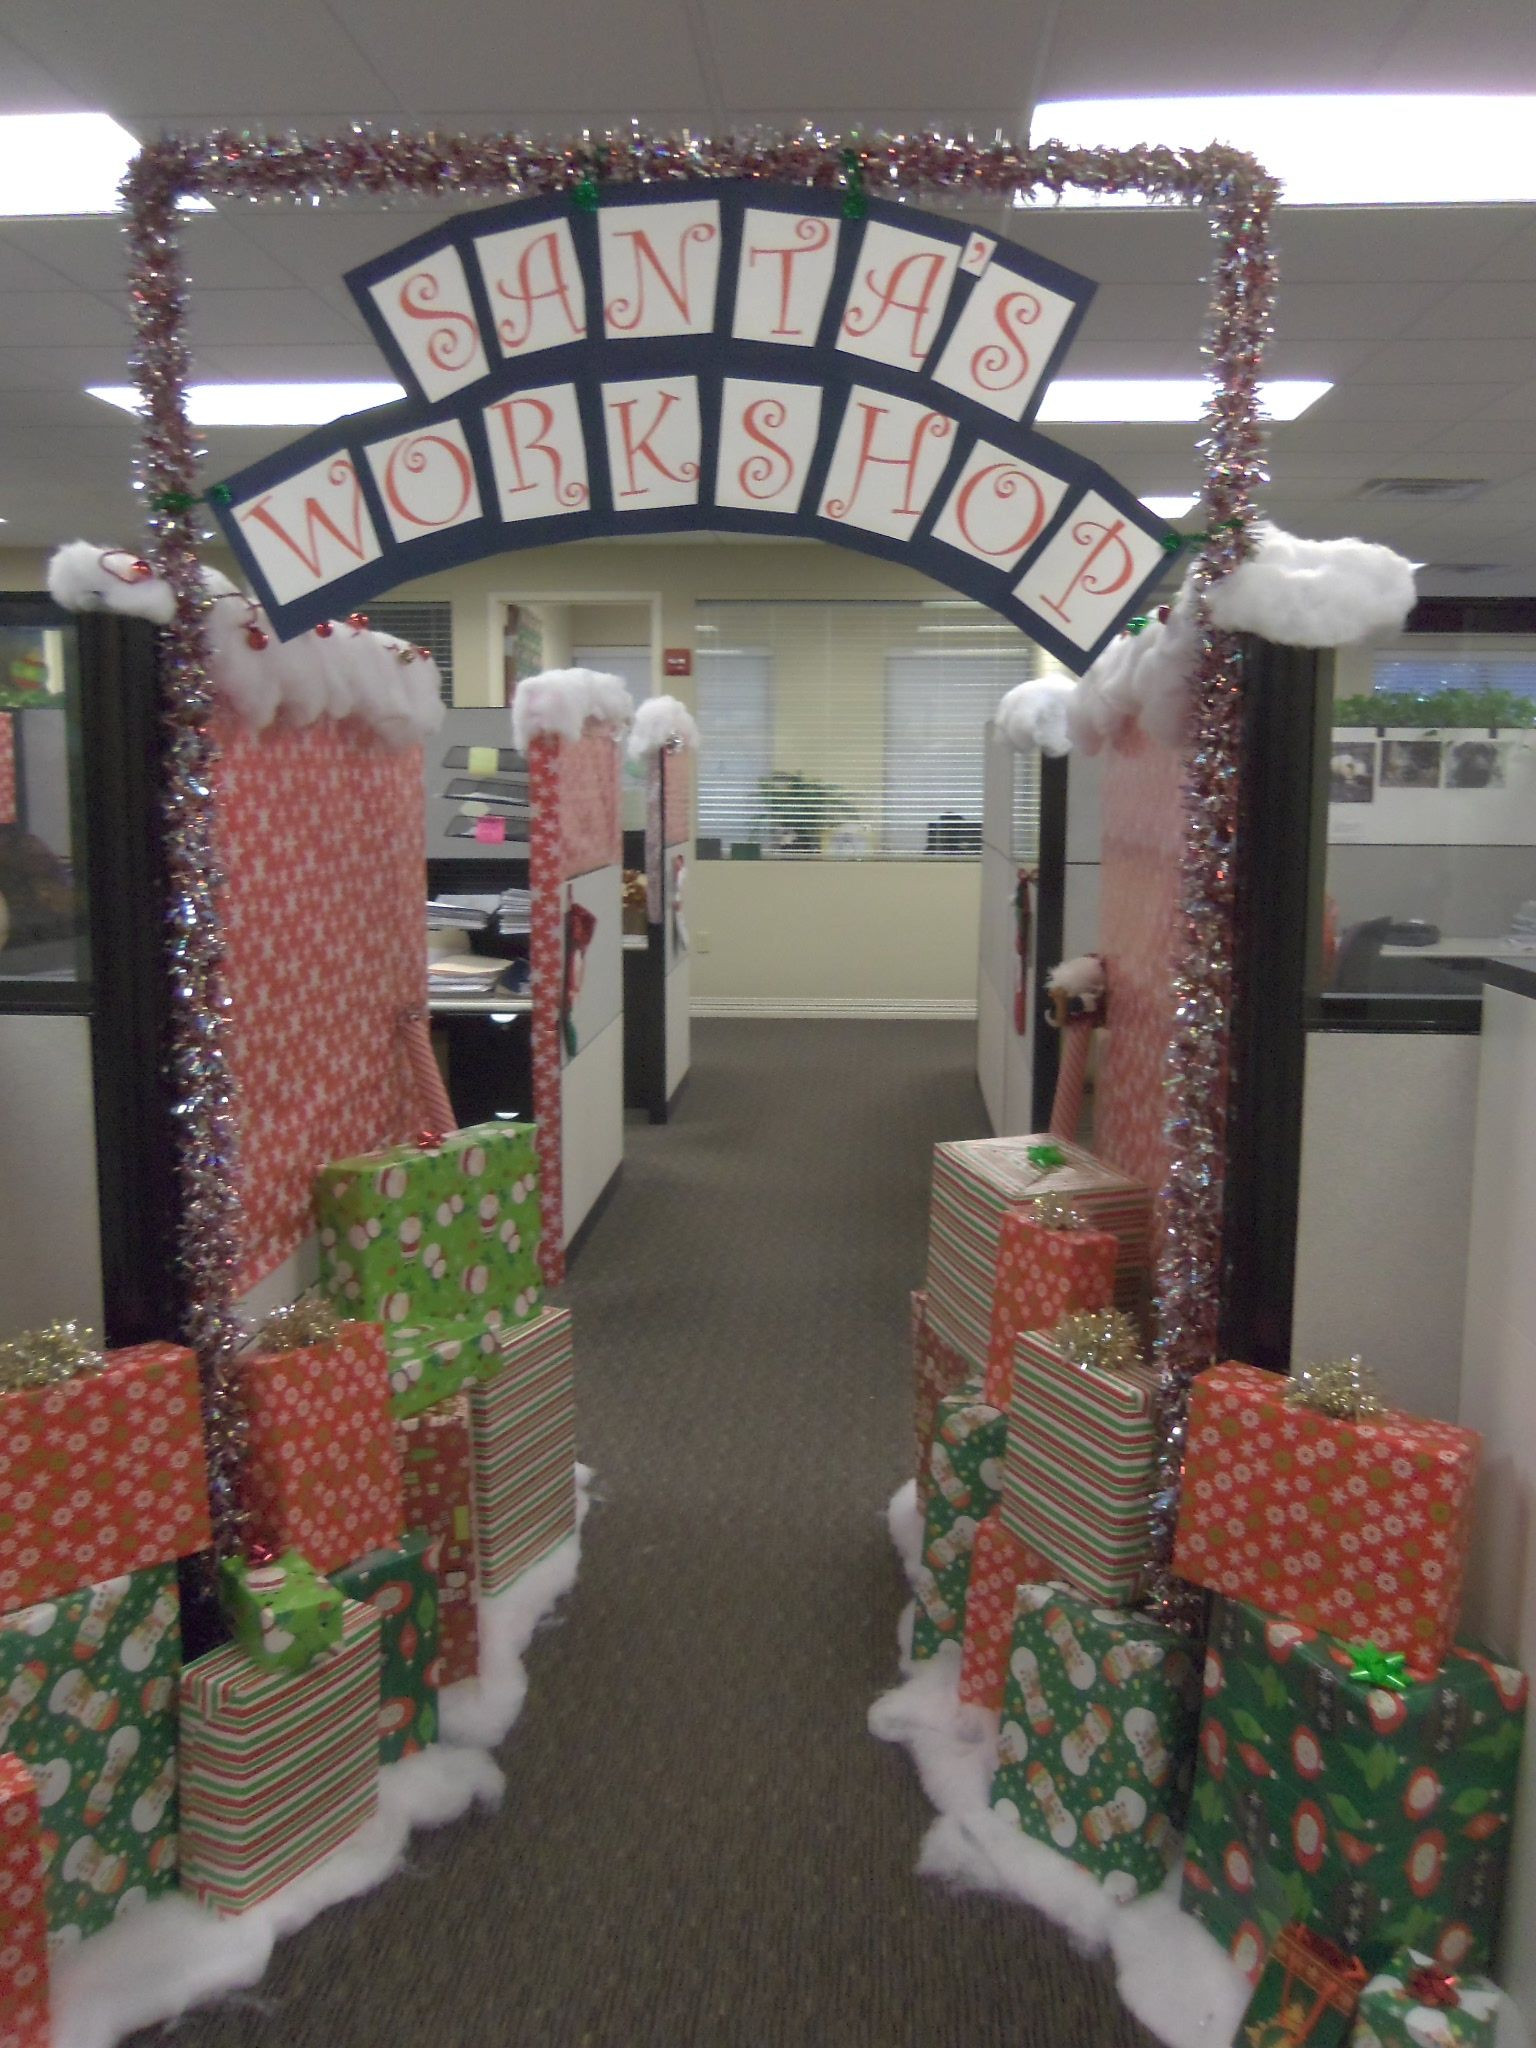 Christmas Office Party Ideas
 Christmas decorations can boost morale at the office